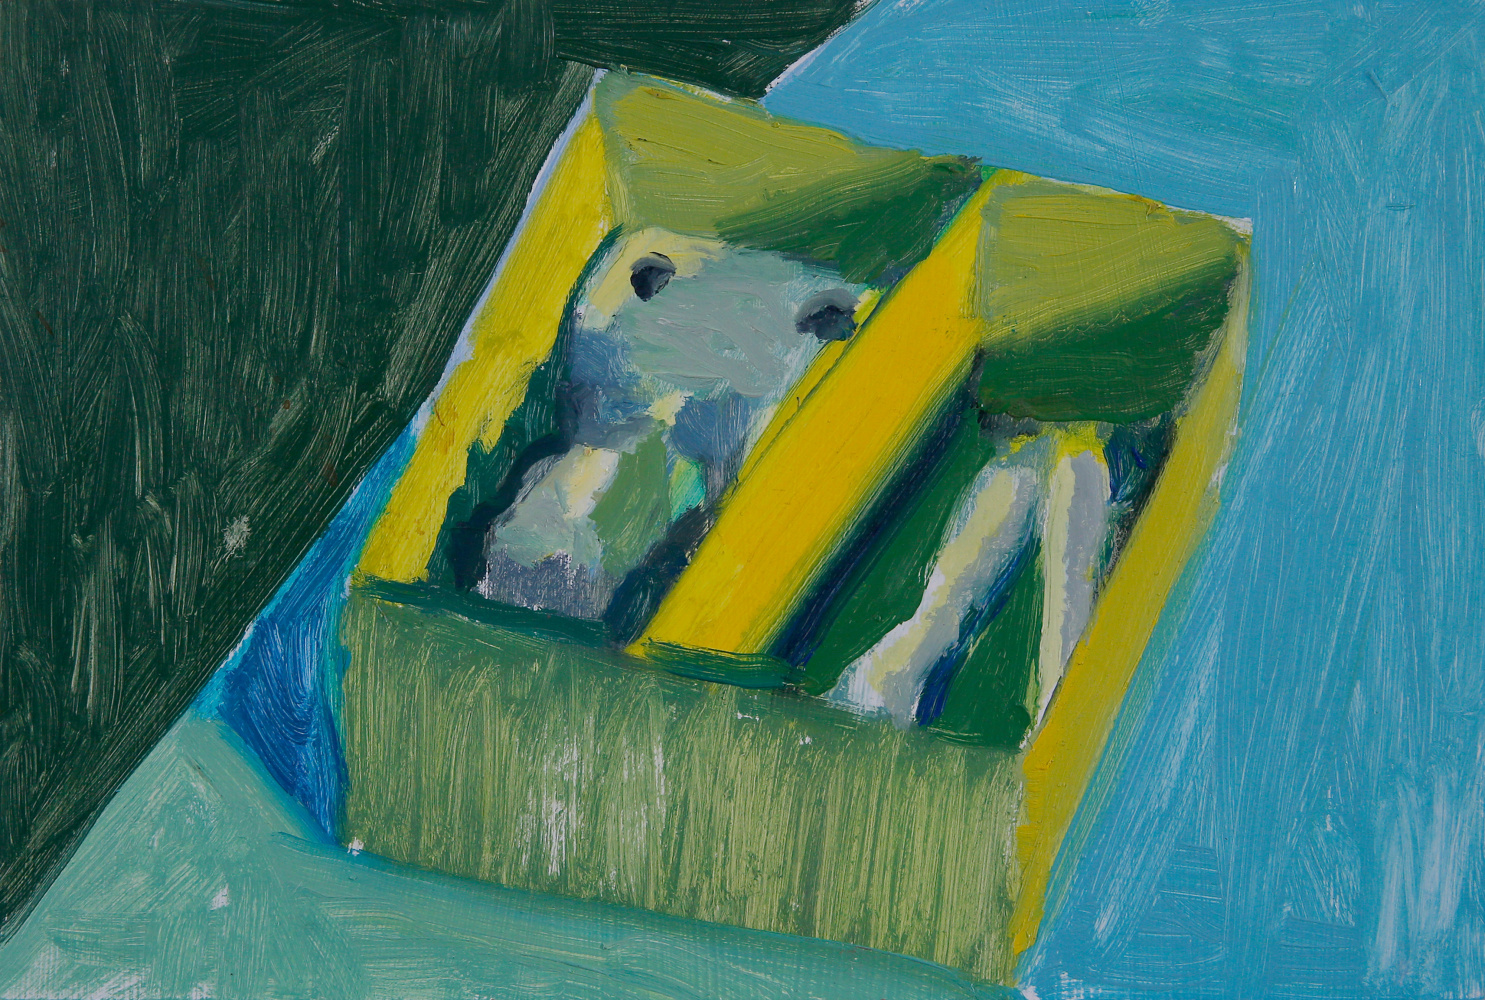 Boxed II, 2021

Oil on Panel

6.69h x 10w in